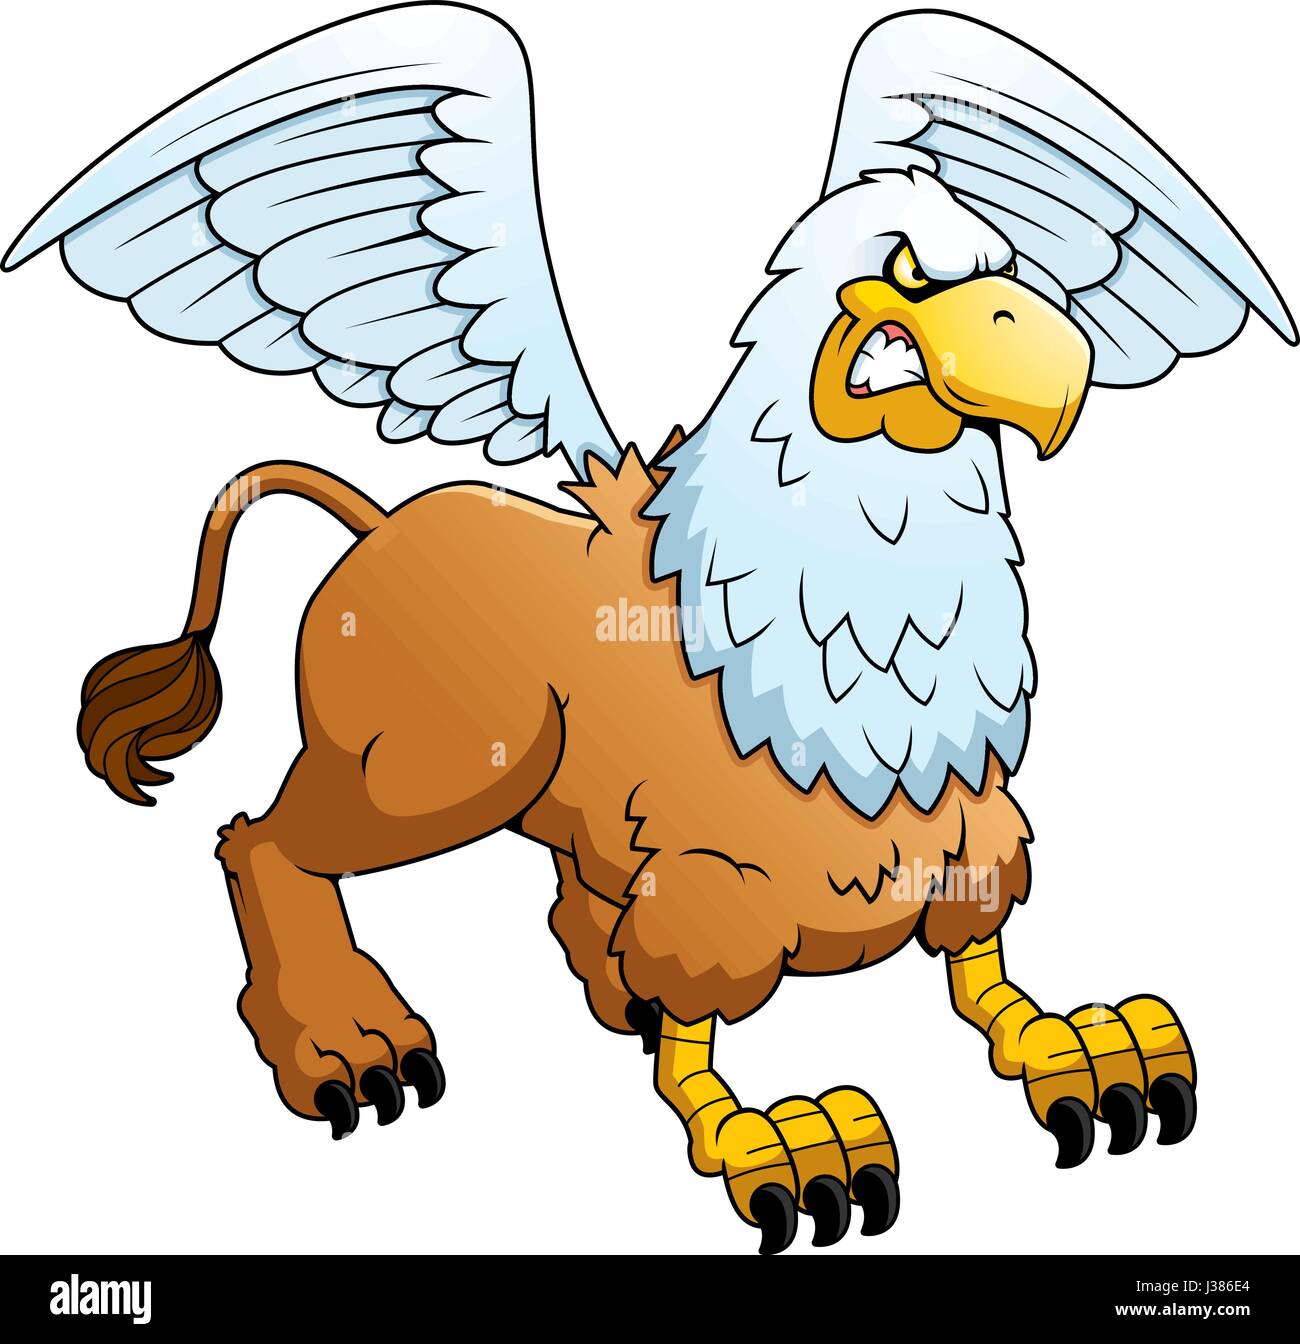 A cartoon illustration of a griffin looking angry. Stock Vector